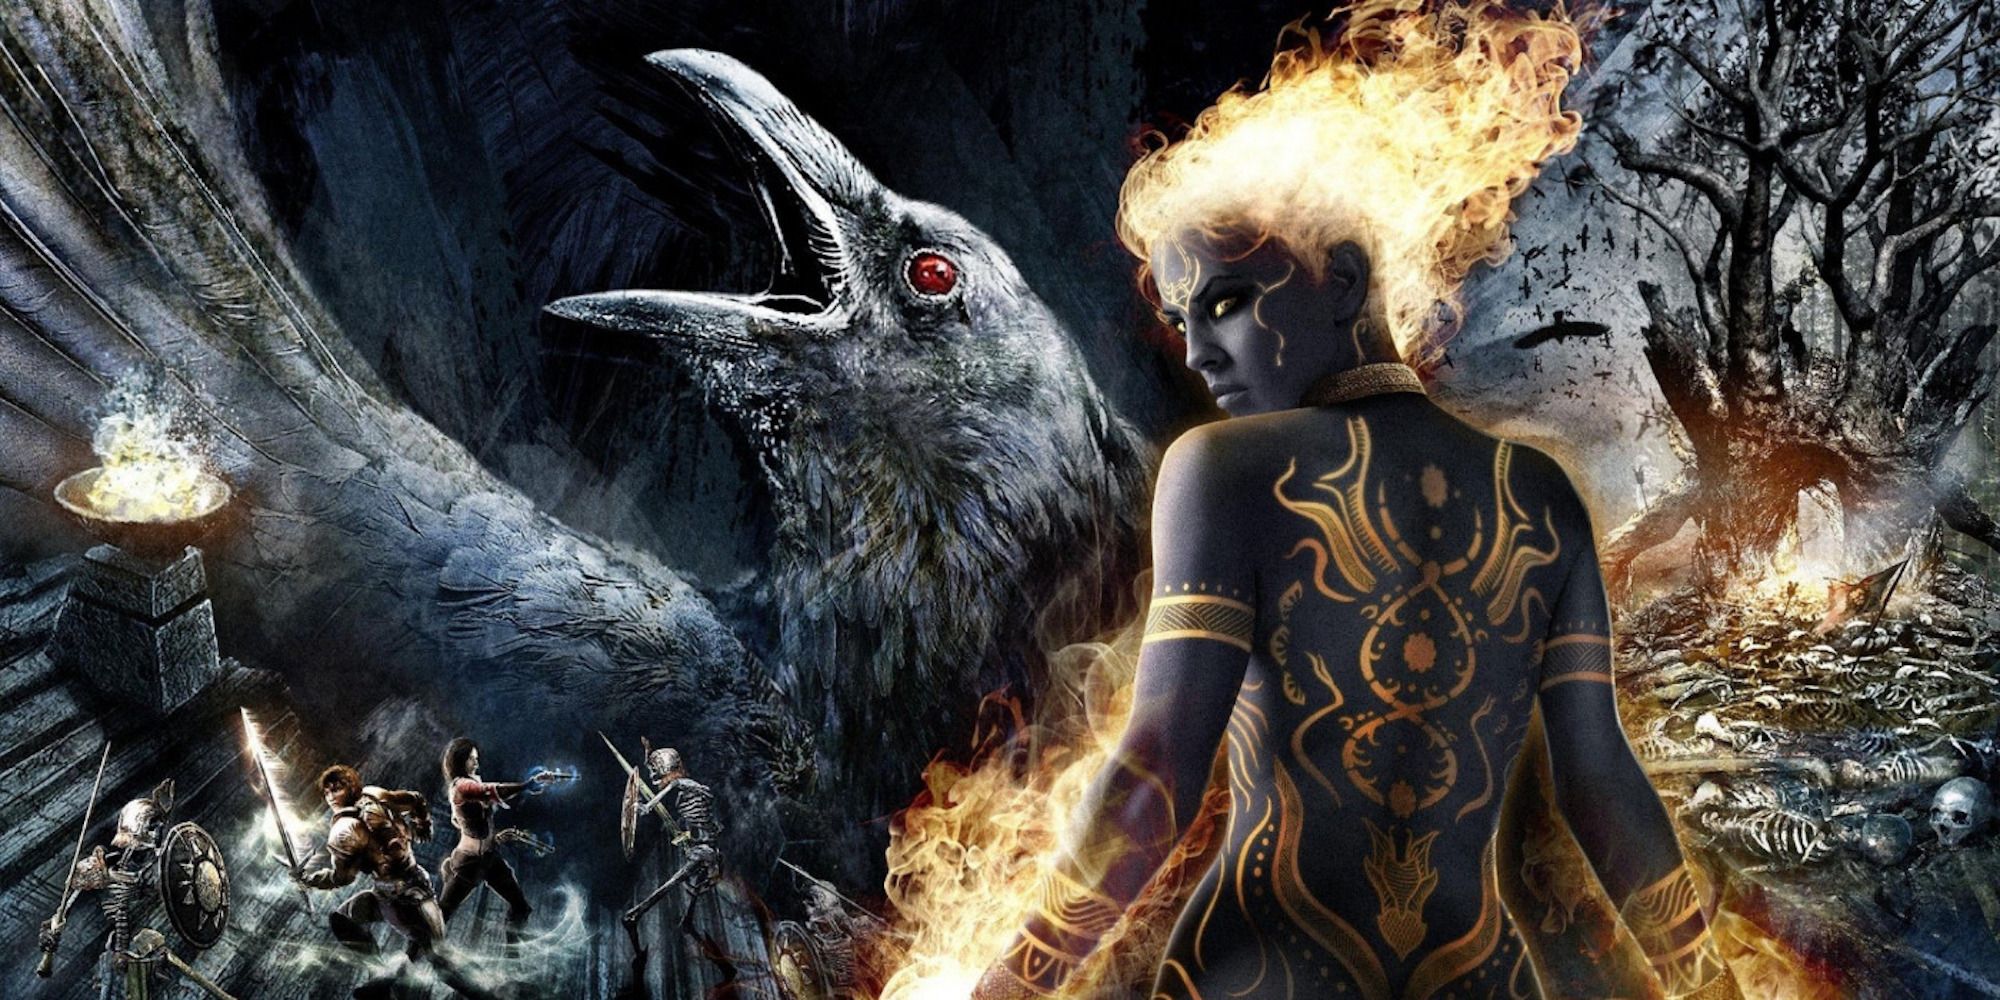 Promo art featuring characters in Dungeon Siege 3